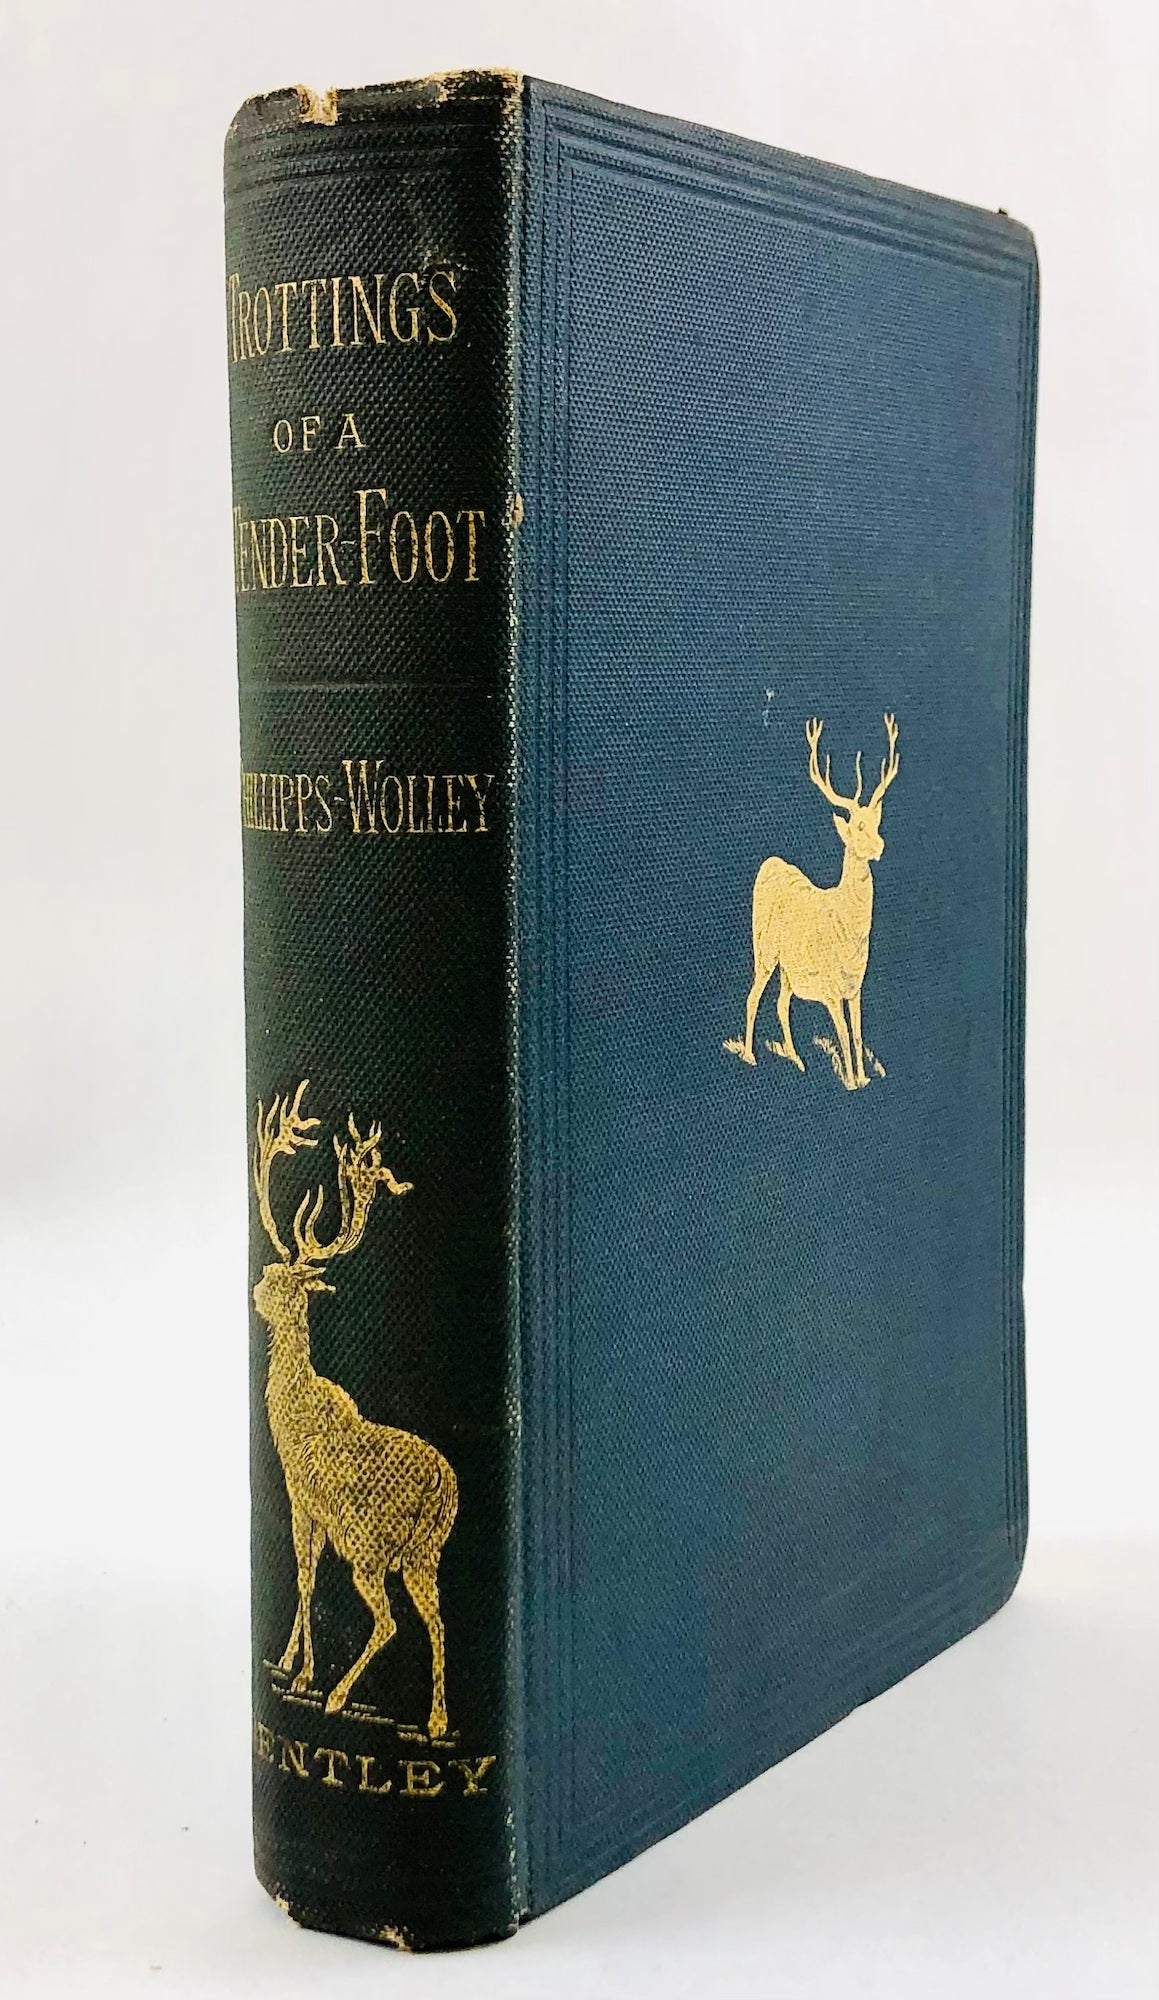 Phillipps-Wolley, Clive - The Trottings of a Tenderfoot; or, a Visit to the Columbian Fiords and Spitzbergen